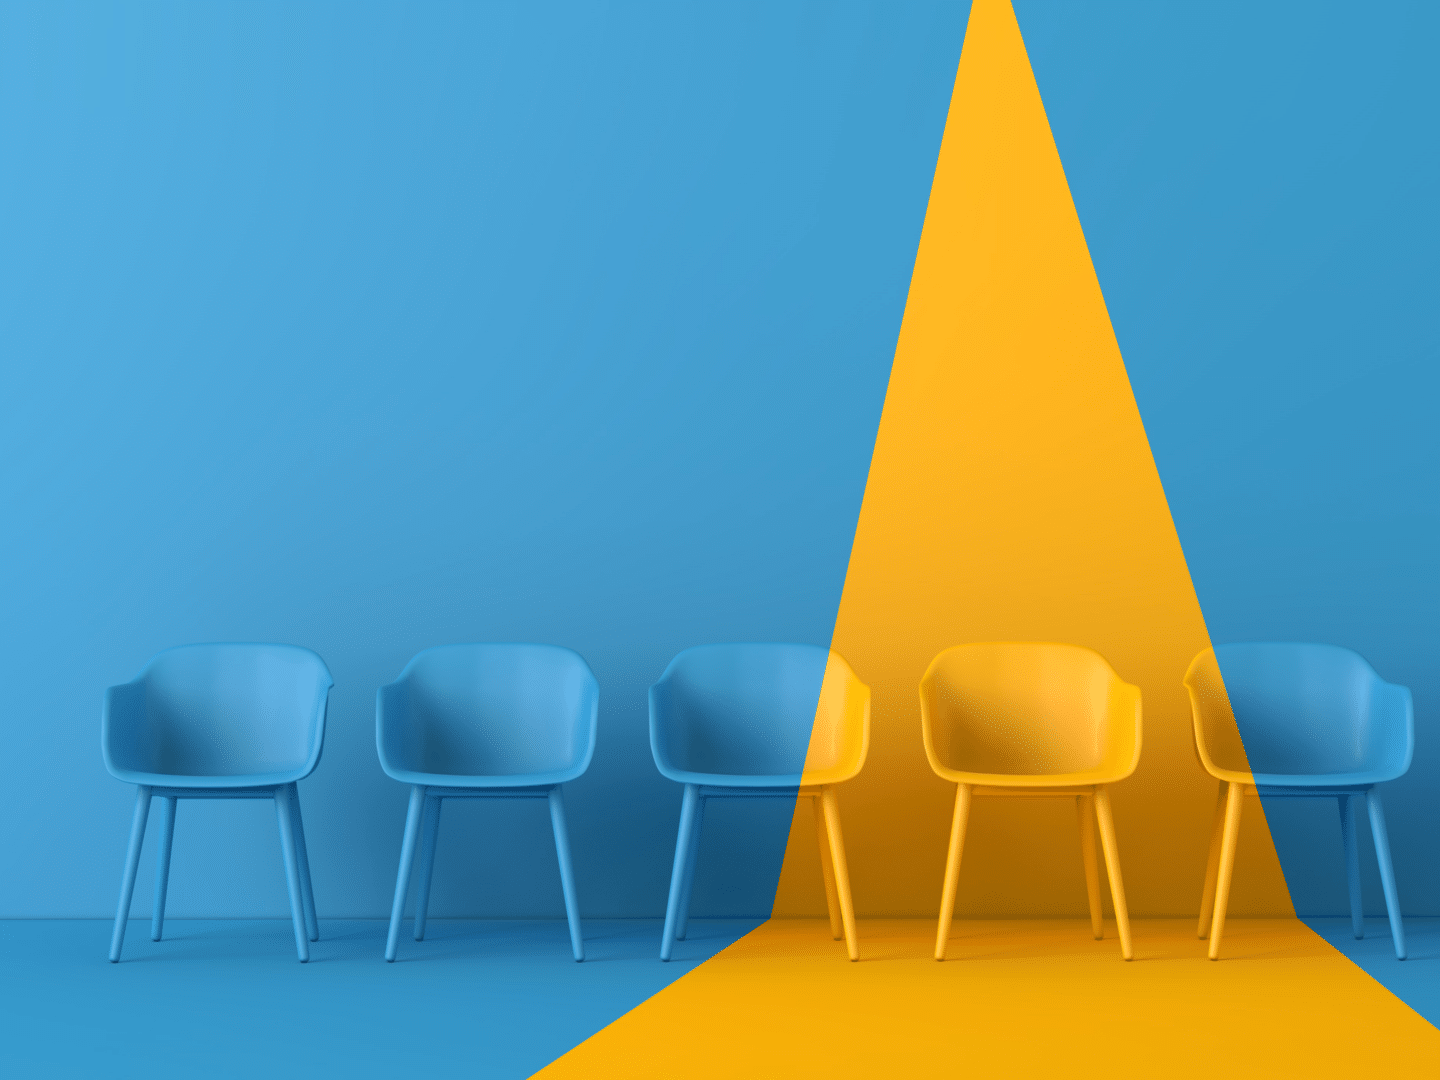 Blue background and chairs with yellow spotlight shining on one chair.